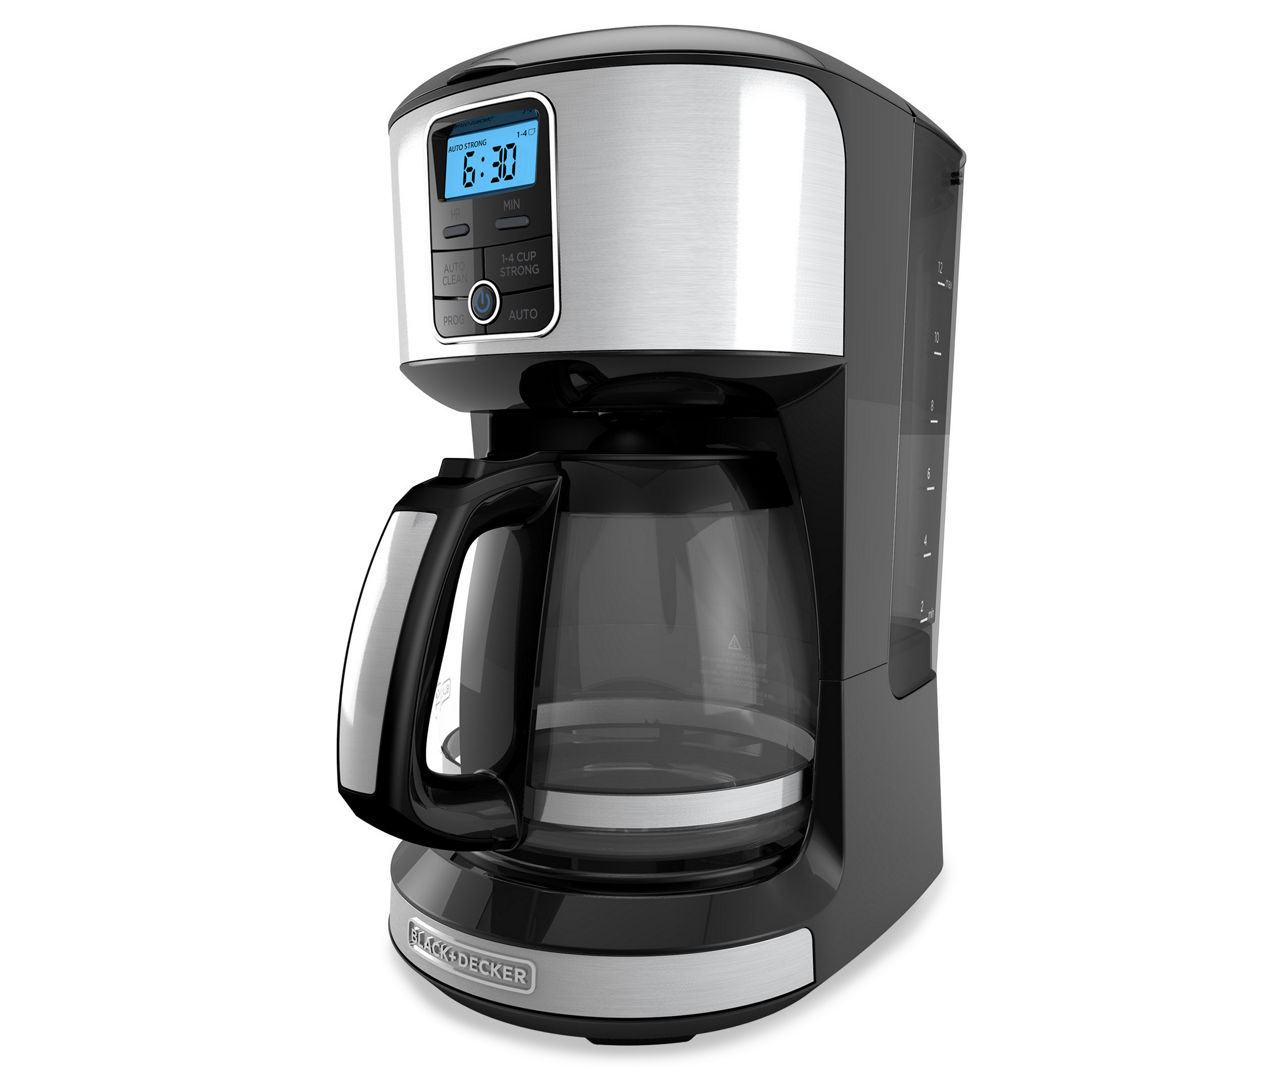 Black + Decker 12-Cup Coffee Maker with Glass Carafe